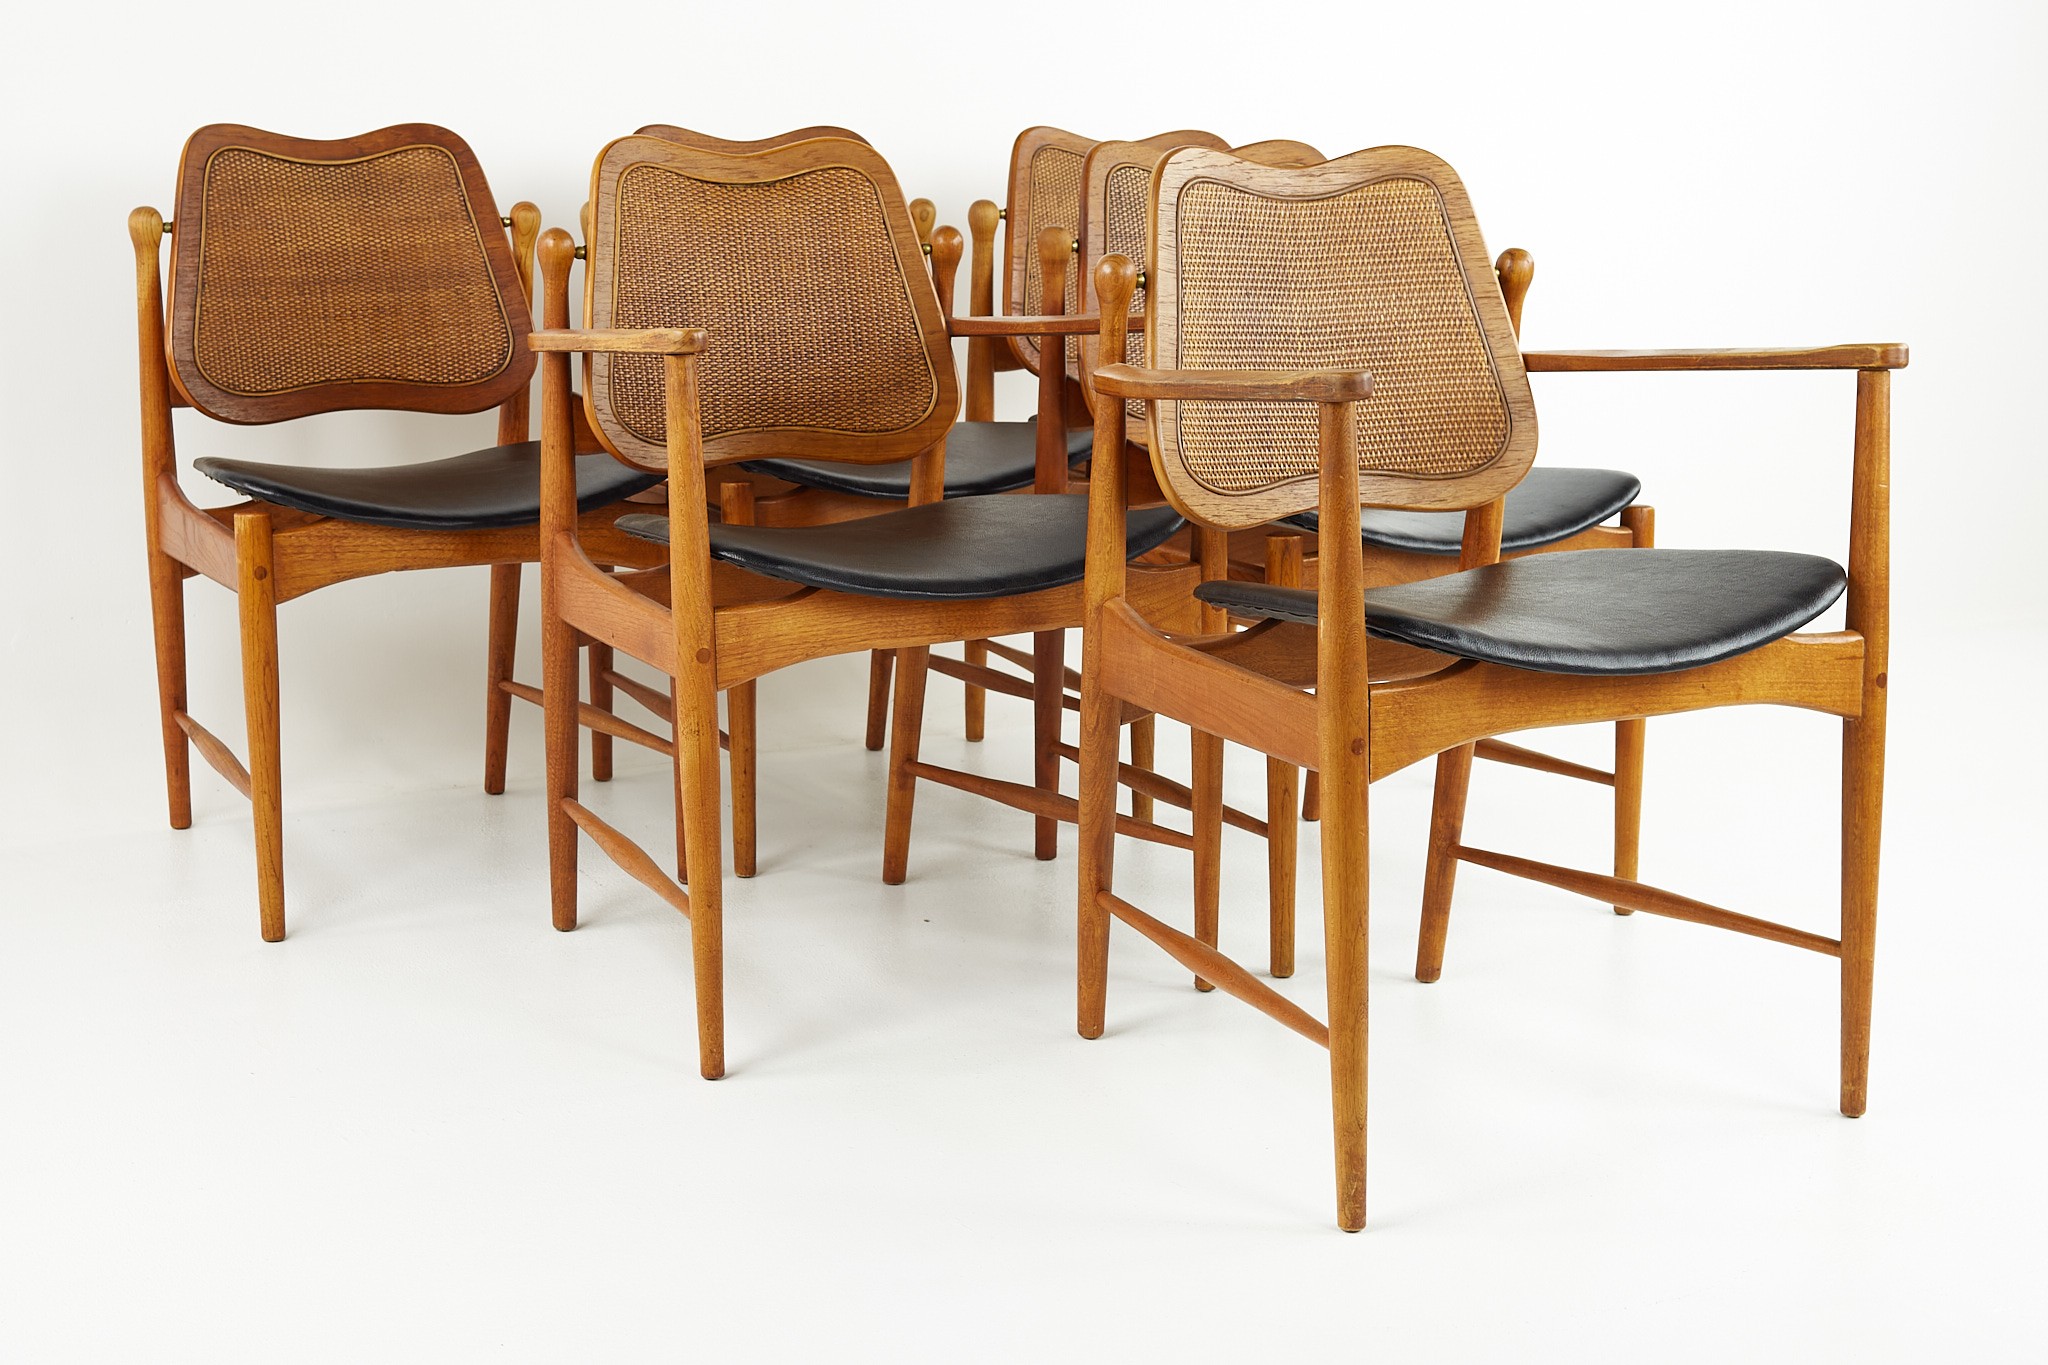 Arne Vodder Mid Century Teak and Cane Dining Chairs - Set of 6